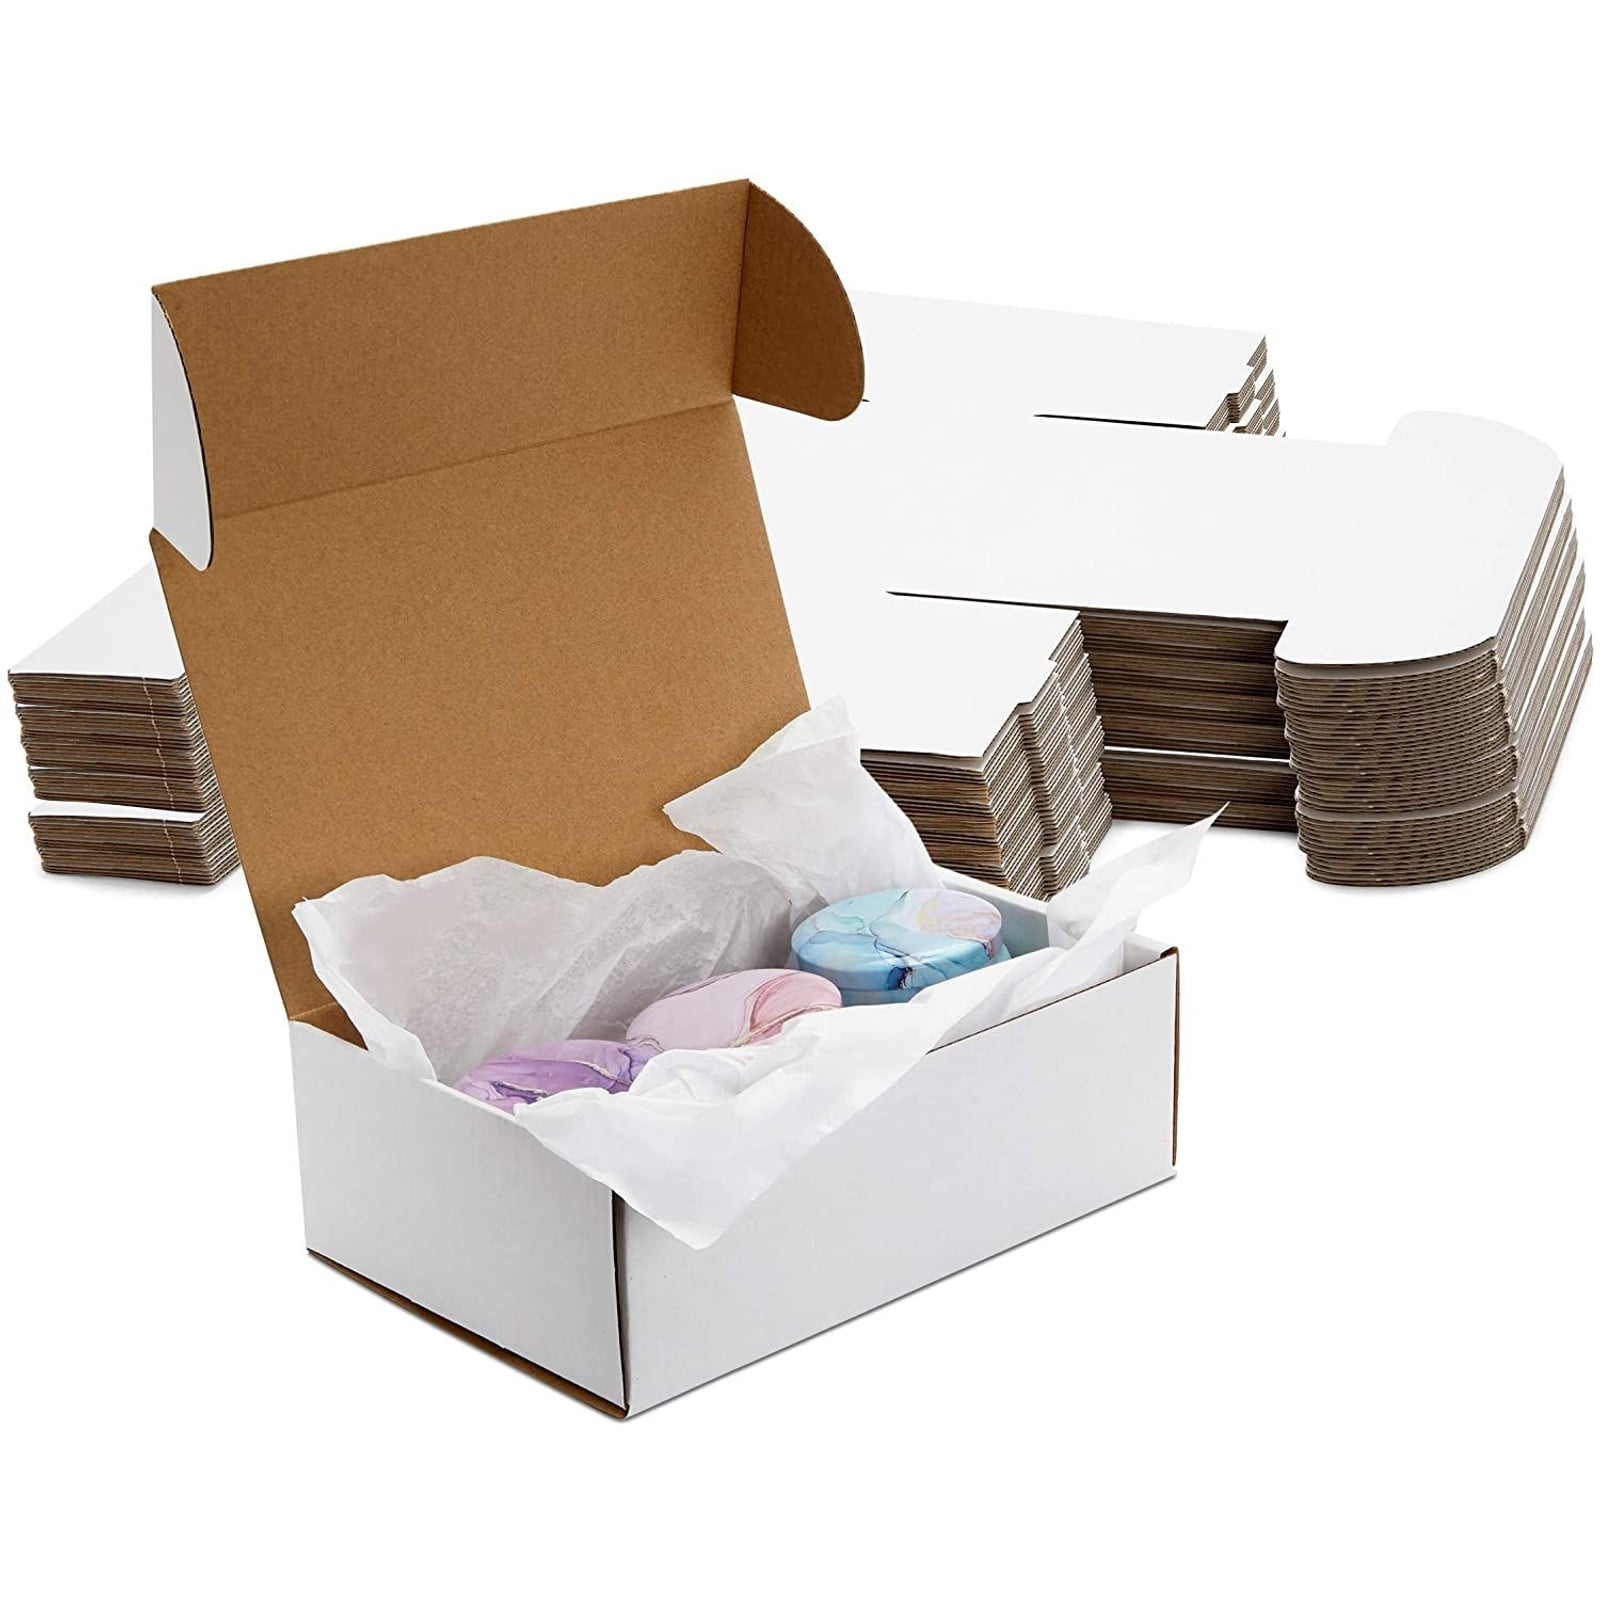 PICK 6x6x2 WHITE CORRUGATED MAILERS SHIPPING PACKING FOLDING BOX BOXES MAILING